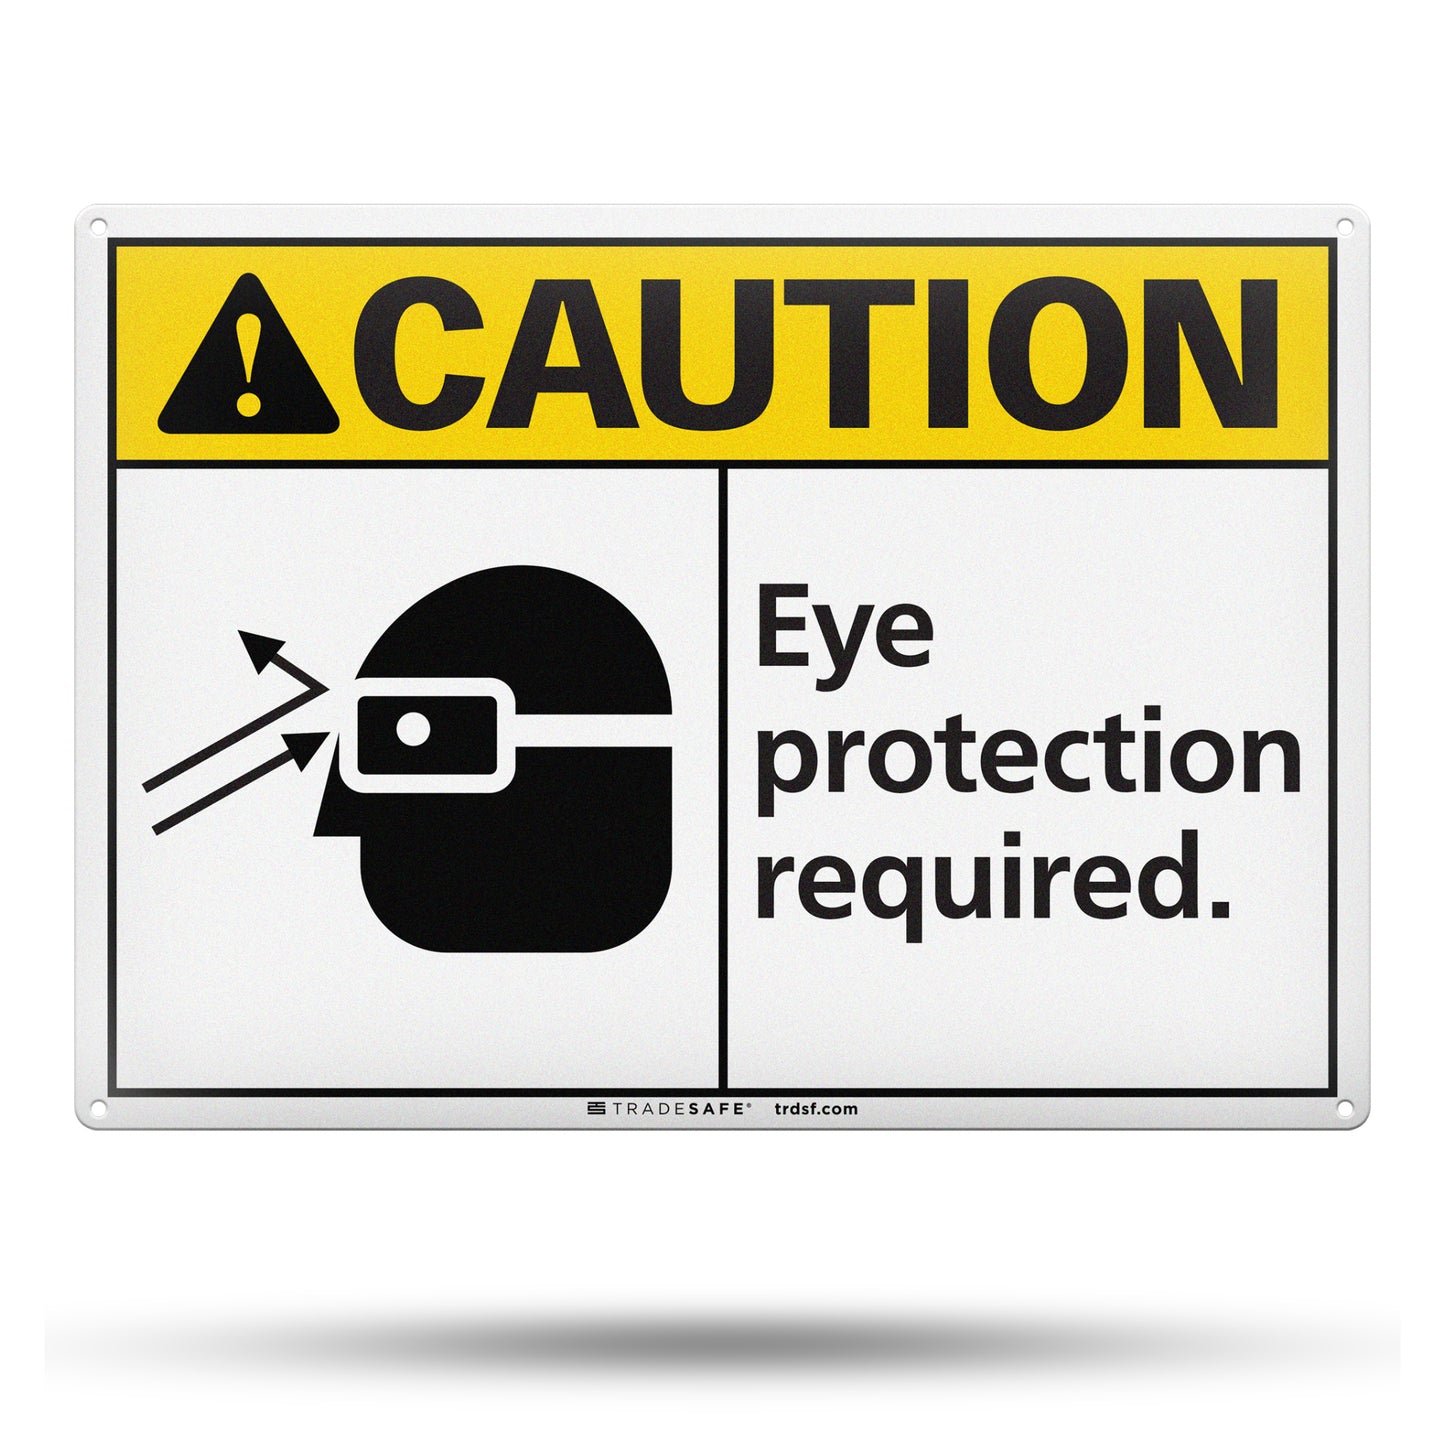 eye protection required sign